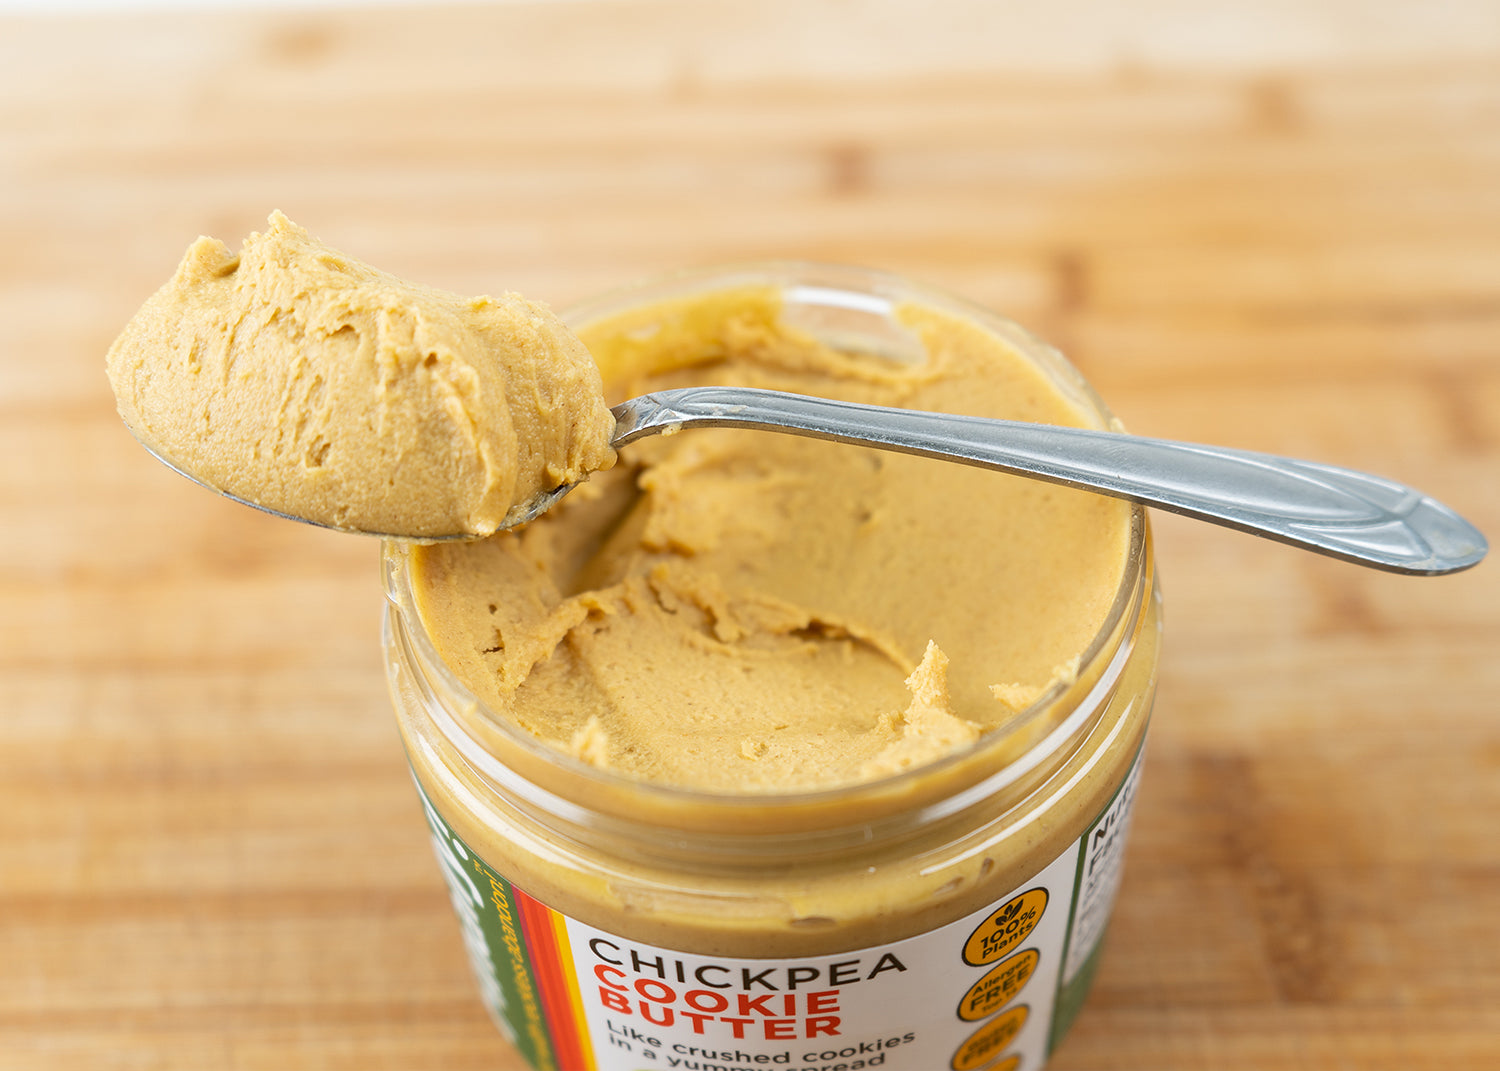 Chickpea Cookie Butter